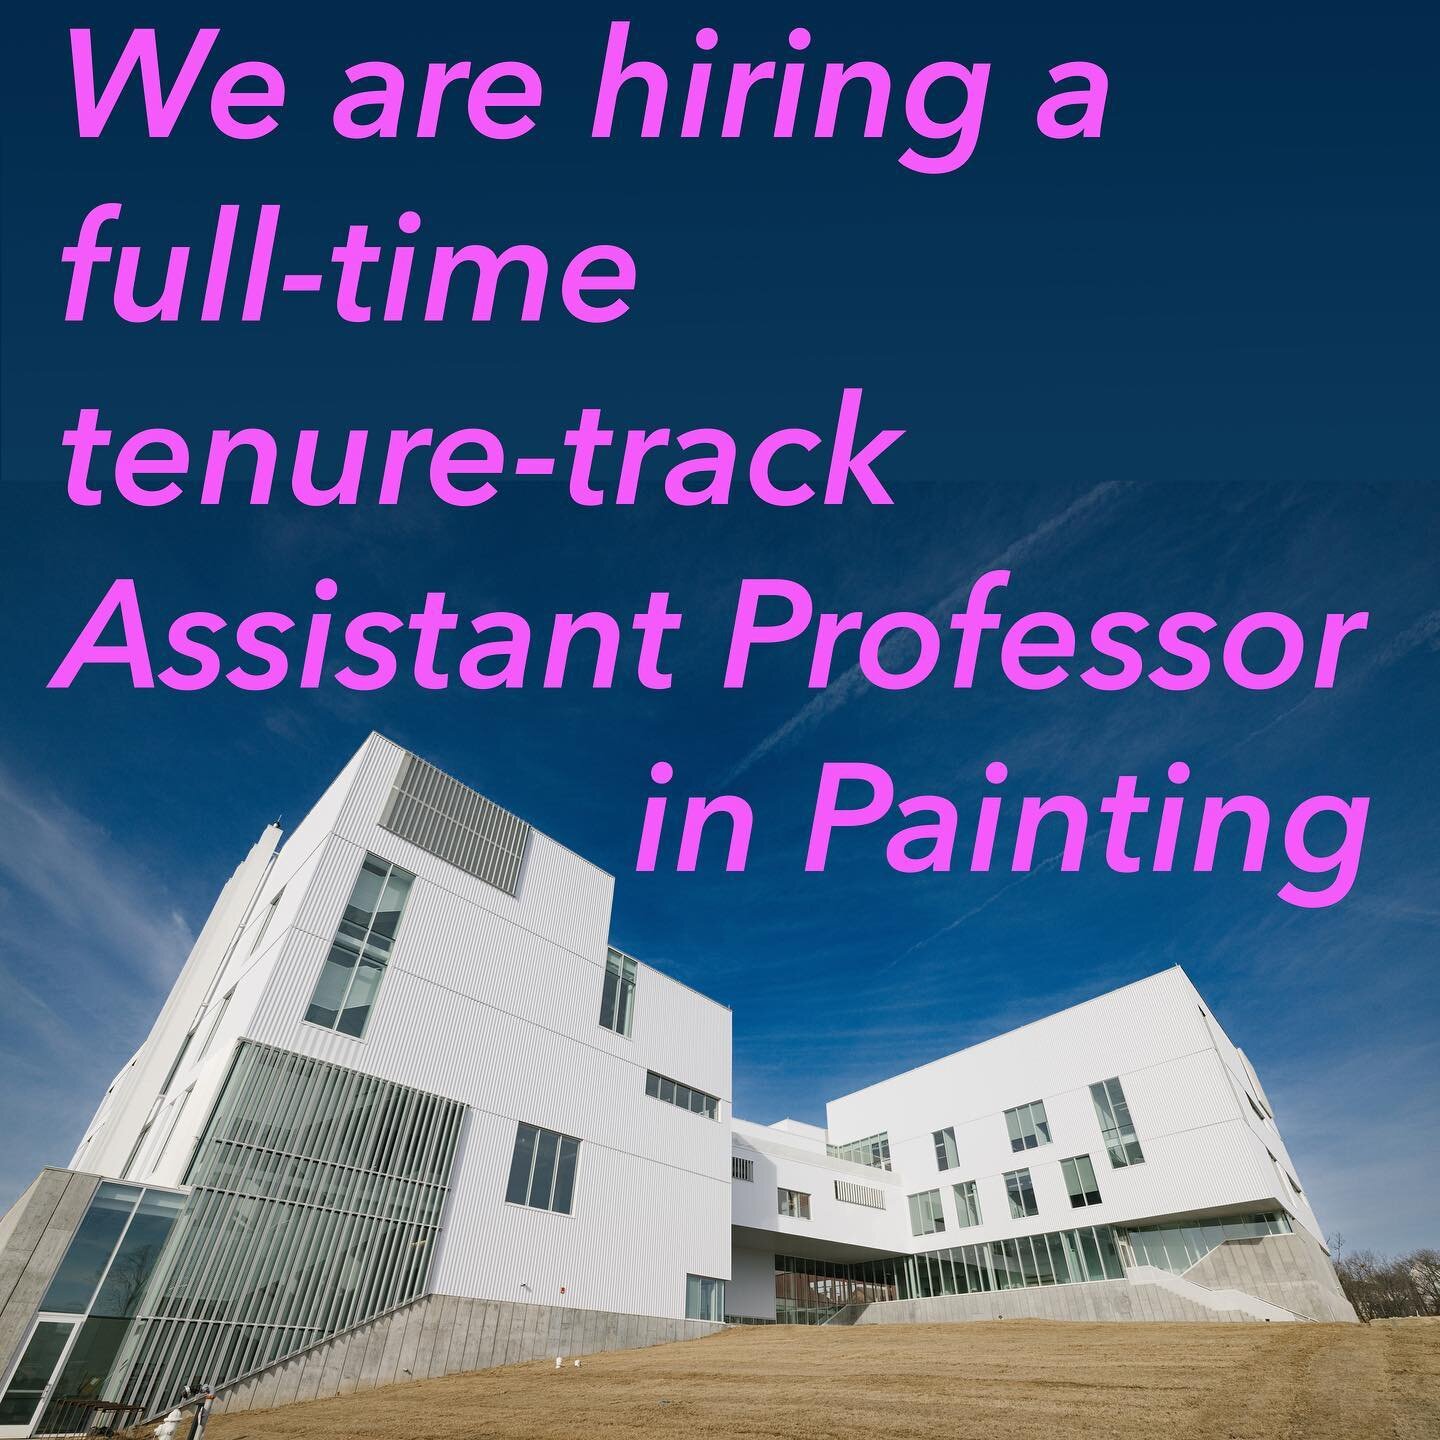 The School of Art at the University of Arkansas seeks to hire a full-time tenure-track Assistant Professor of Art, Painting. 
&bull;
Visit jobs.uark.edu for details. Applications received by 12/18/2023 will receive full consideration.